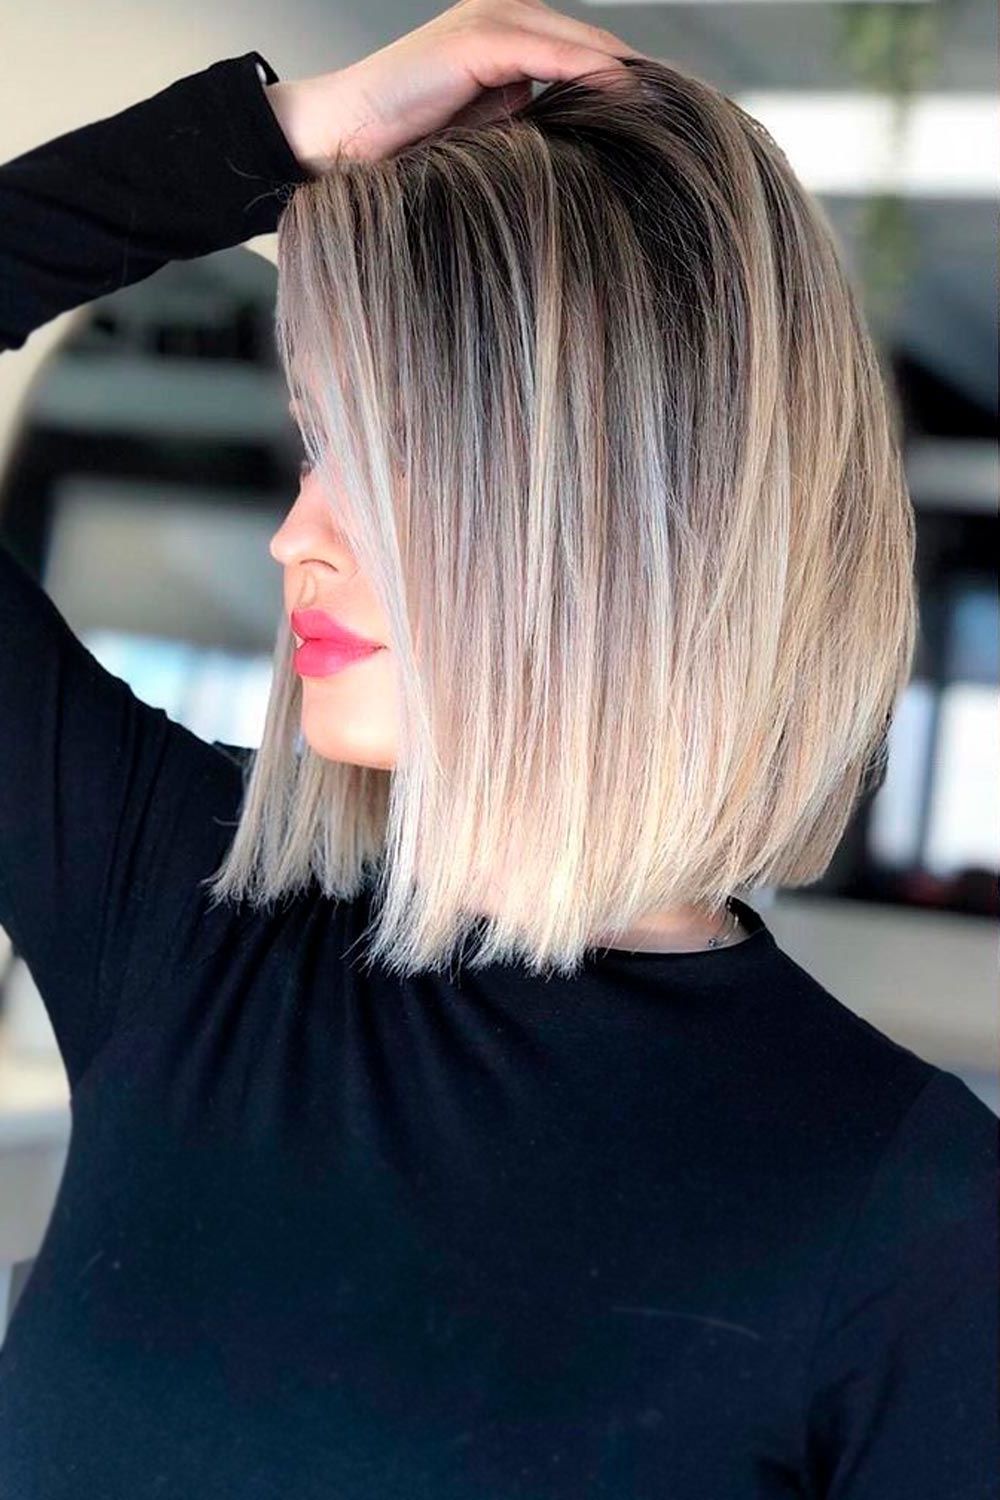 20 Blunt Bob Hairstyles To Wear This Season – Lovehairstyles Intended For Most Up To Date Shoulder Length Blonde Bob Haircuts (View 15 of 20)